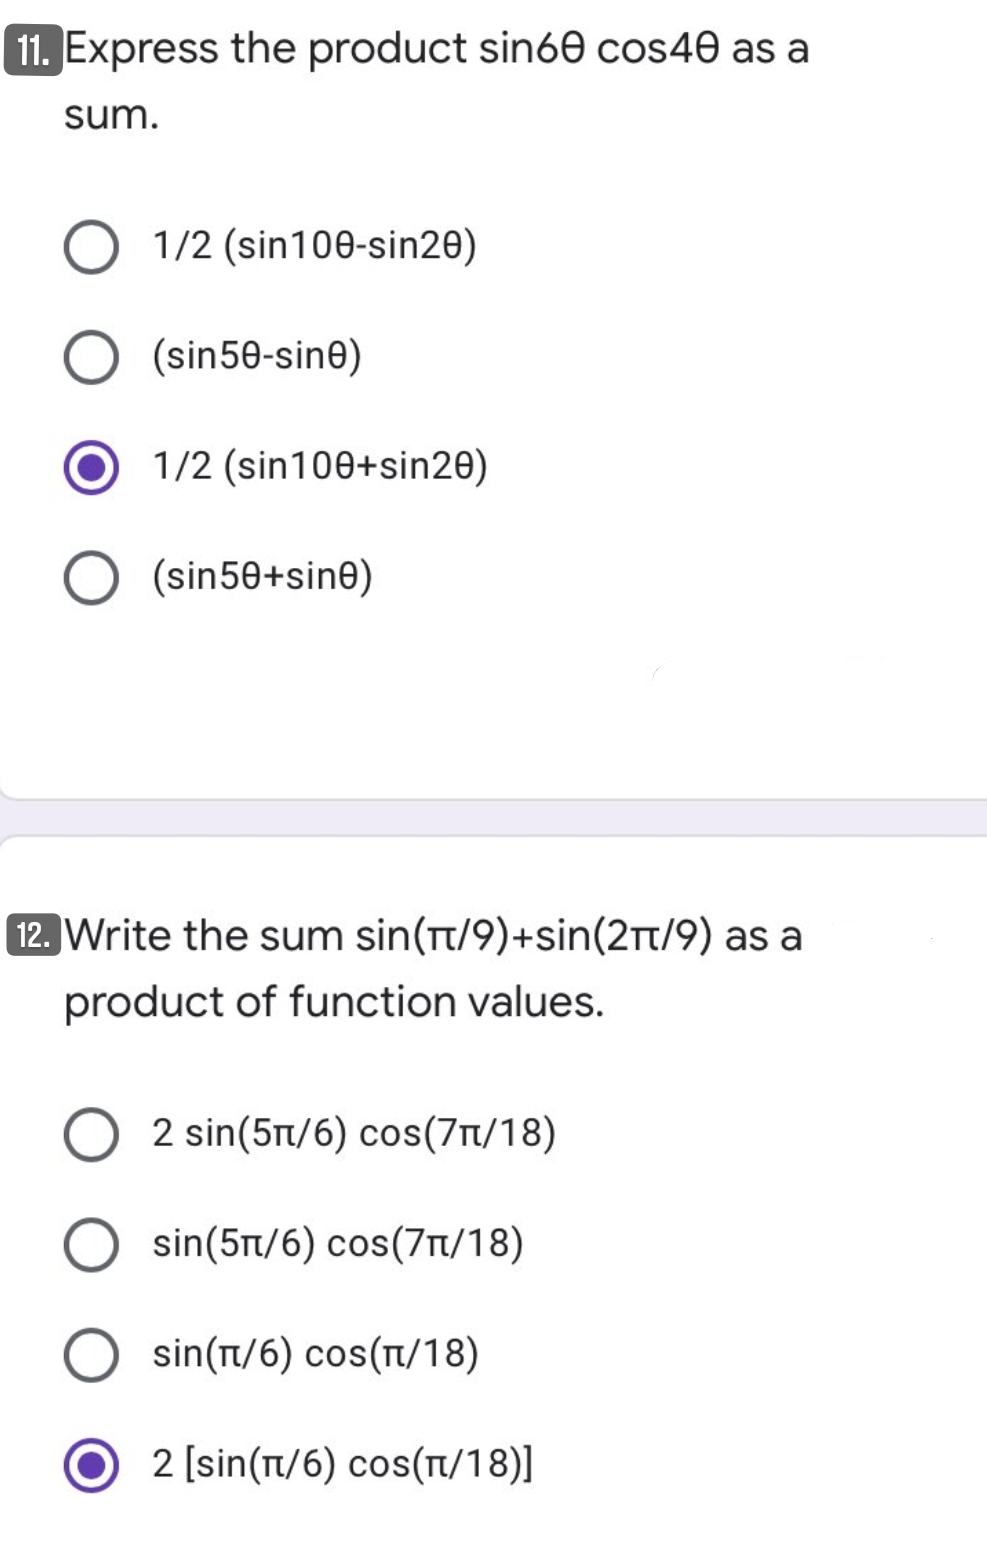 11. Express the product sin60 cos40 as a
sum.
1/2 (sin100-sin20)
(sin50-sine)
1/2 (sin100+sin20)
(sin50+sine)
12. Write the sum sin(t/9)+sin(2t/9) as a
product of function values.
2 sin(5t/6) cos(7r/18)
sin(5t/6) cos(7/18)
sin(t/6) cos(t/18)
2 [sin(Tt/6) cos(T/18)]
